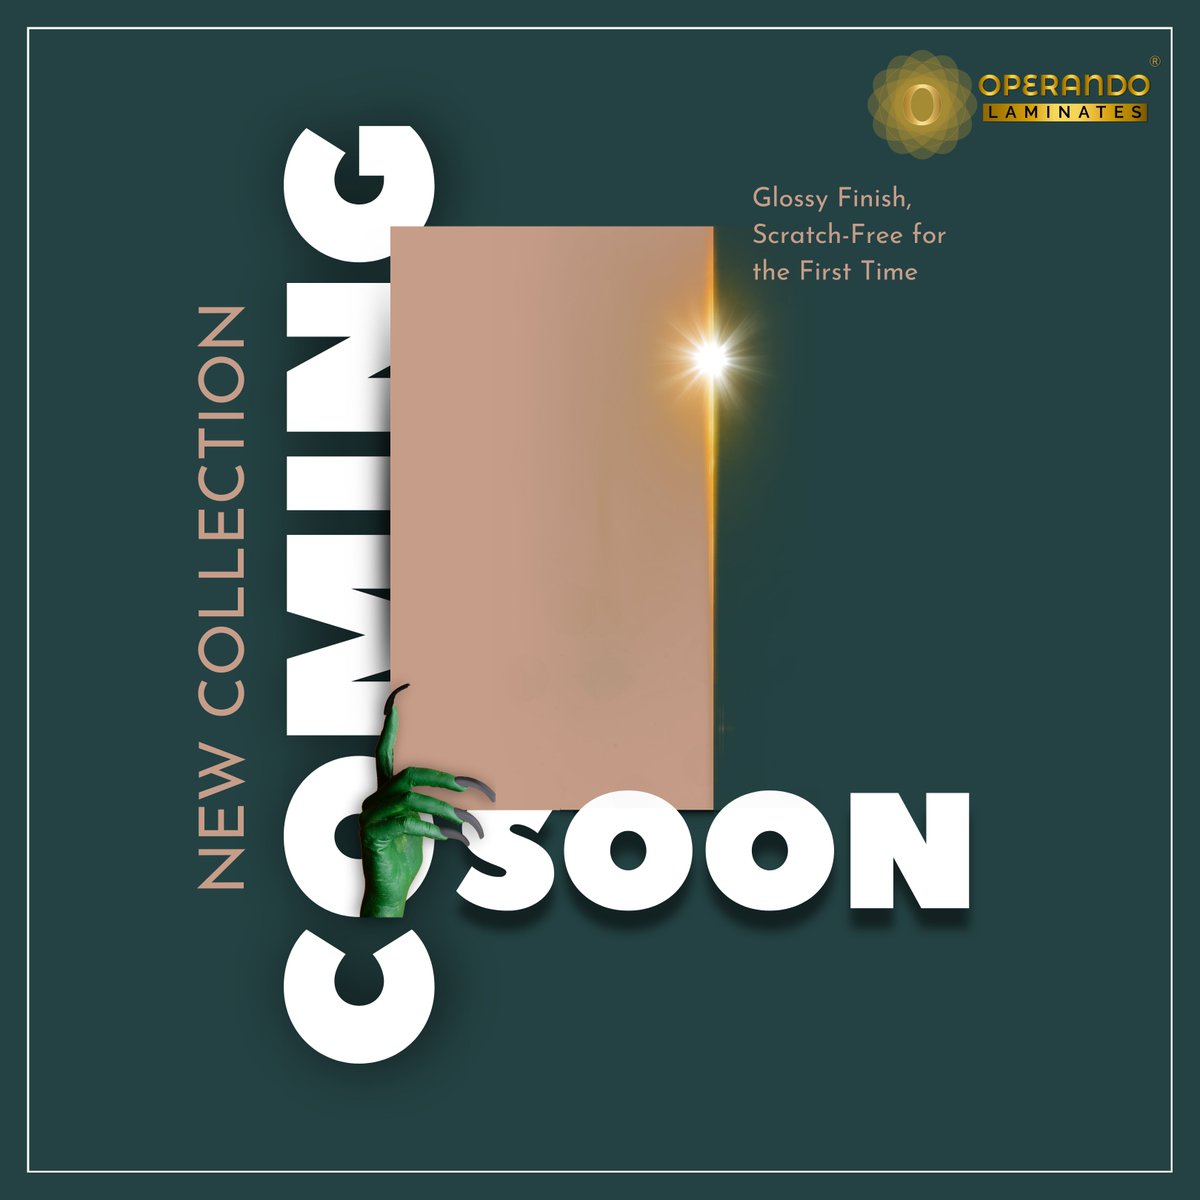 Get ready for a ✨game-changer! Our upcoming Anti-Scratch Gloss Laminates, the first in India, can bend up to 180 degrees.
.
🎁Stay tuned for the big reveal✂️!
.
.
#OperandoLaminates #SuperGloss #AcrylicLaminates #Laminates #SurfaceSolutions #Furniture #Architects #Architecture